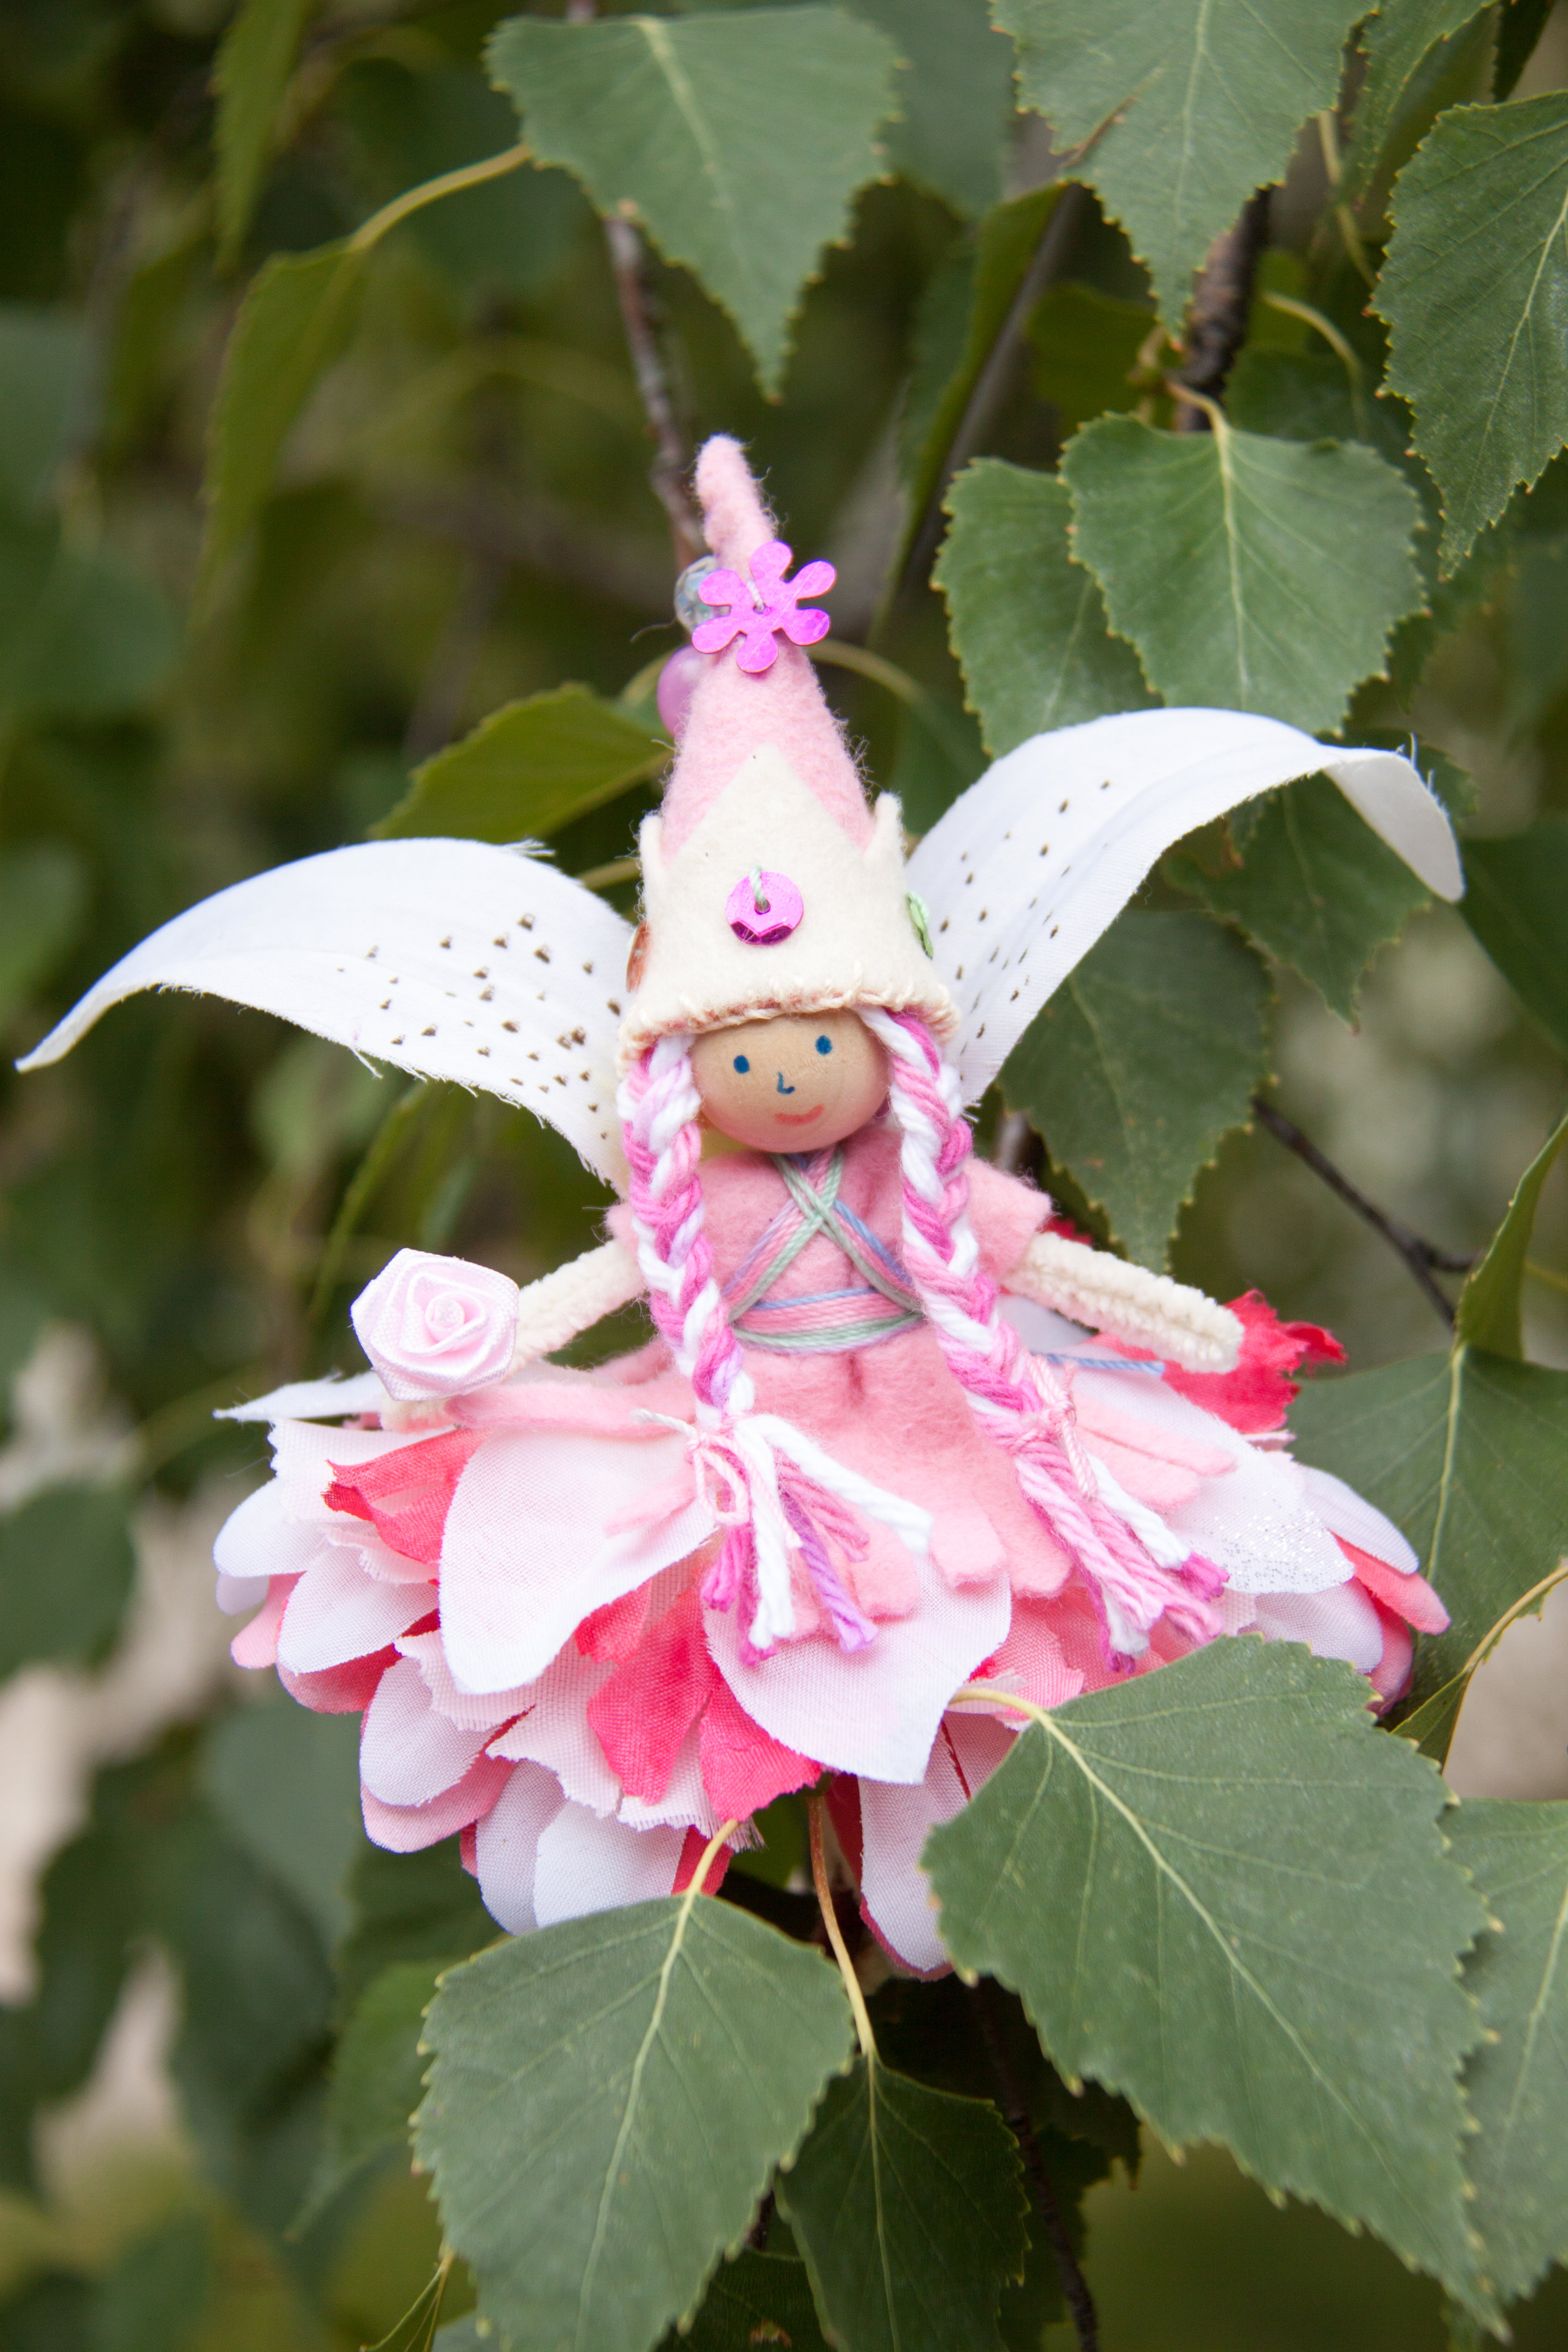 Fairy Bendy Doll for Spring | Learn to make your own enchanted crafts with simple supplies with the Forest Fairy Craft Books by Lenka Vodicka-Paredes and Asia Currie